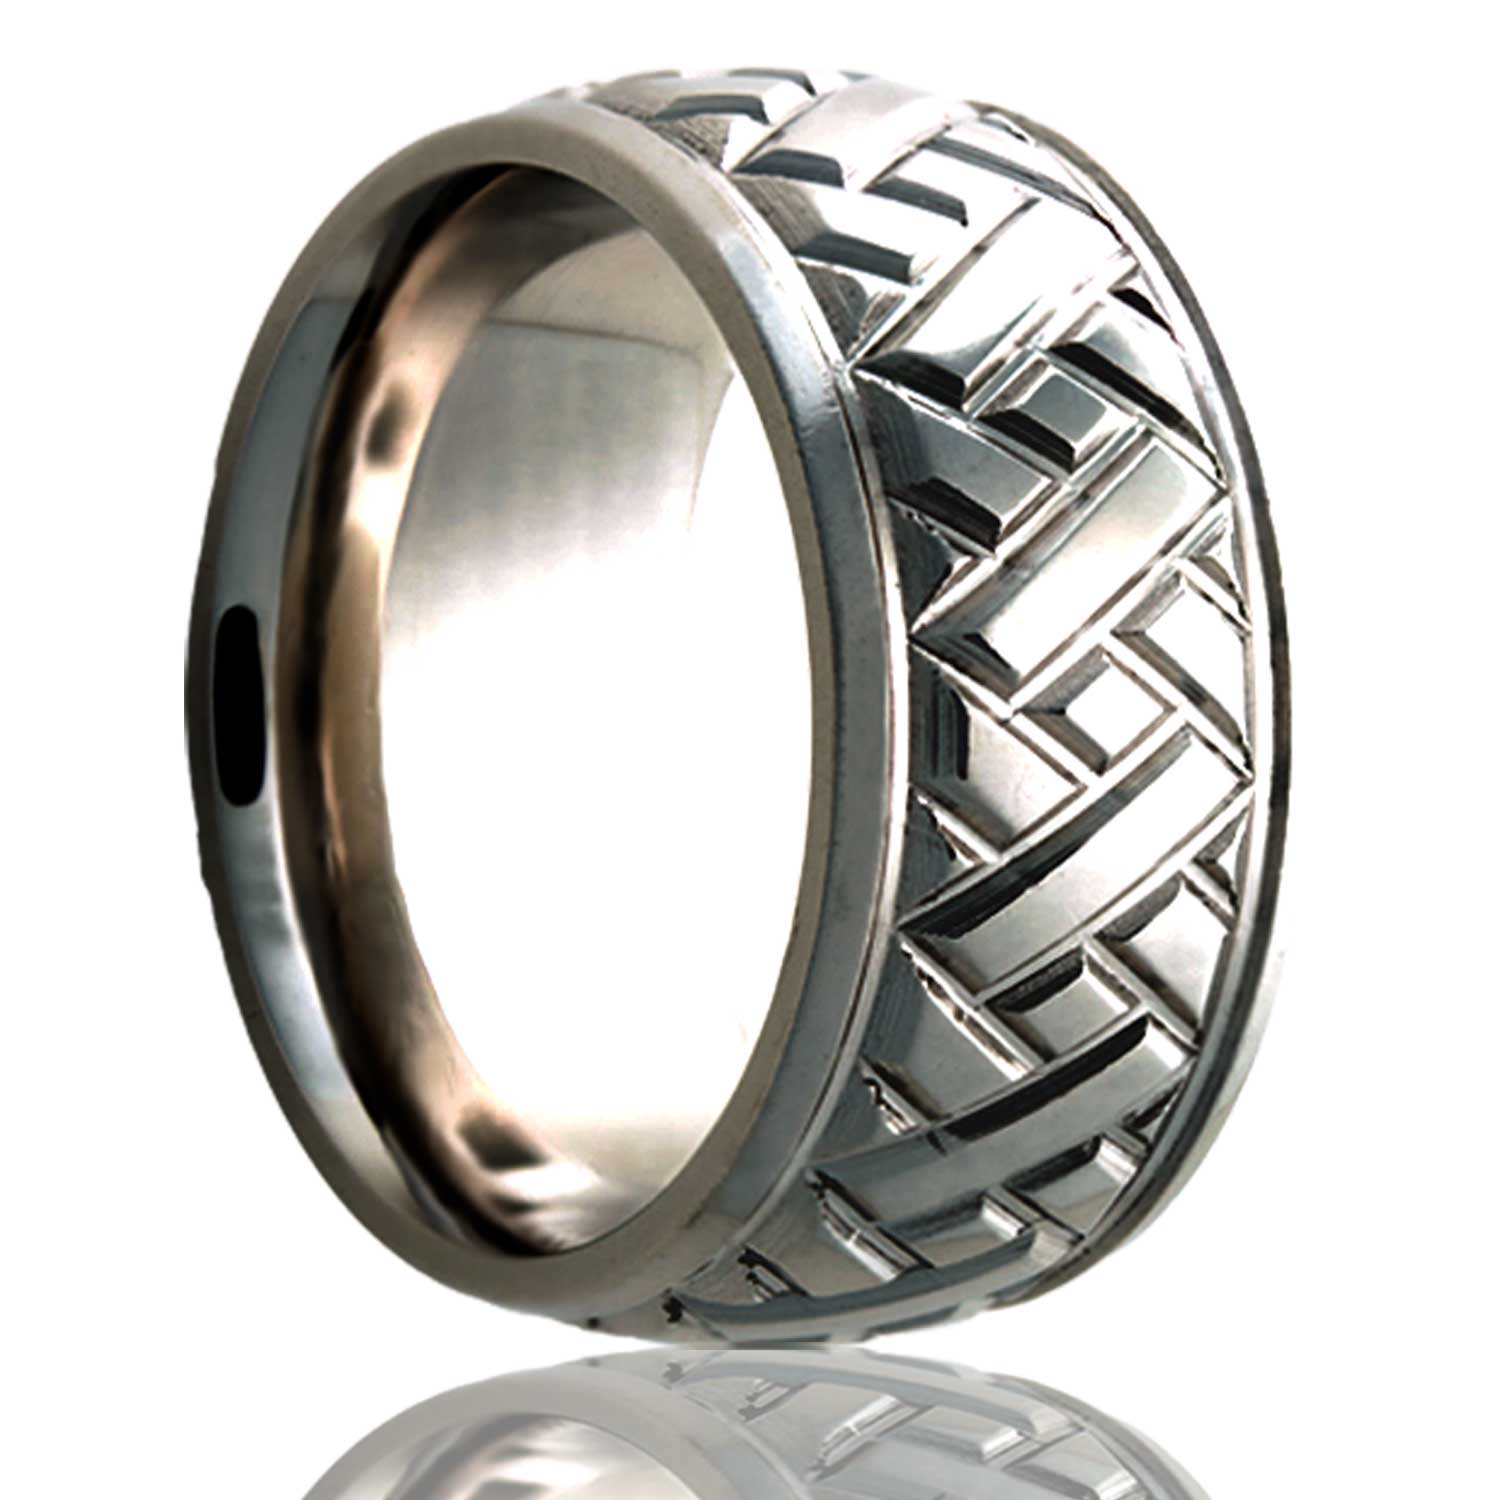 A grooved diagonal pattern domed titanium wedding band displayed on a neutral white background.